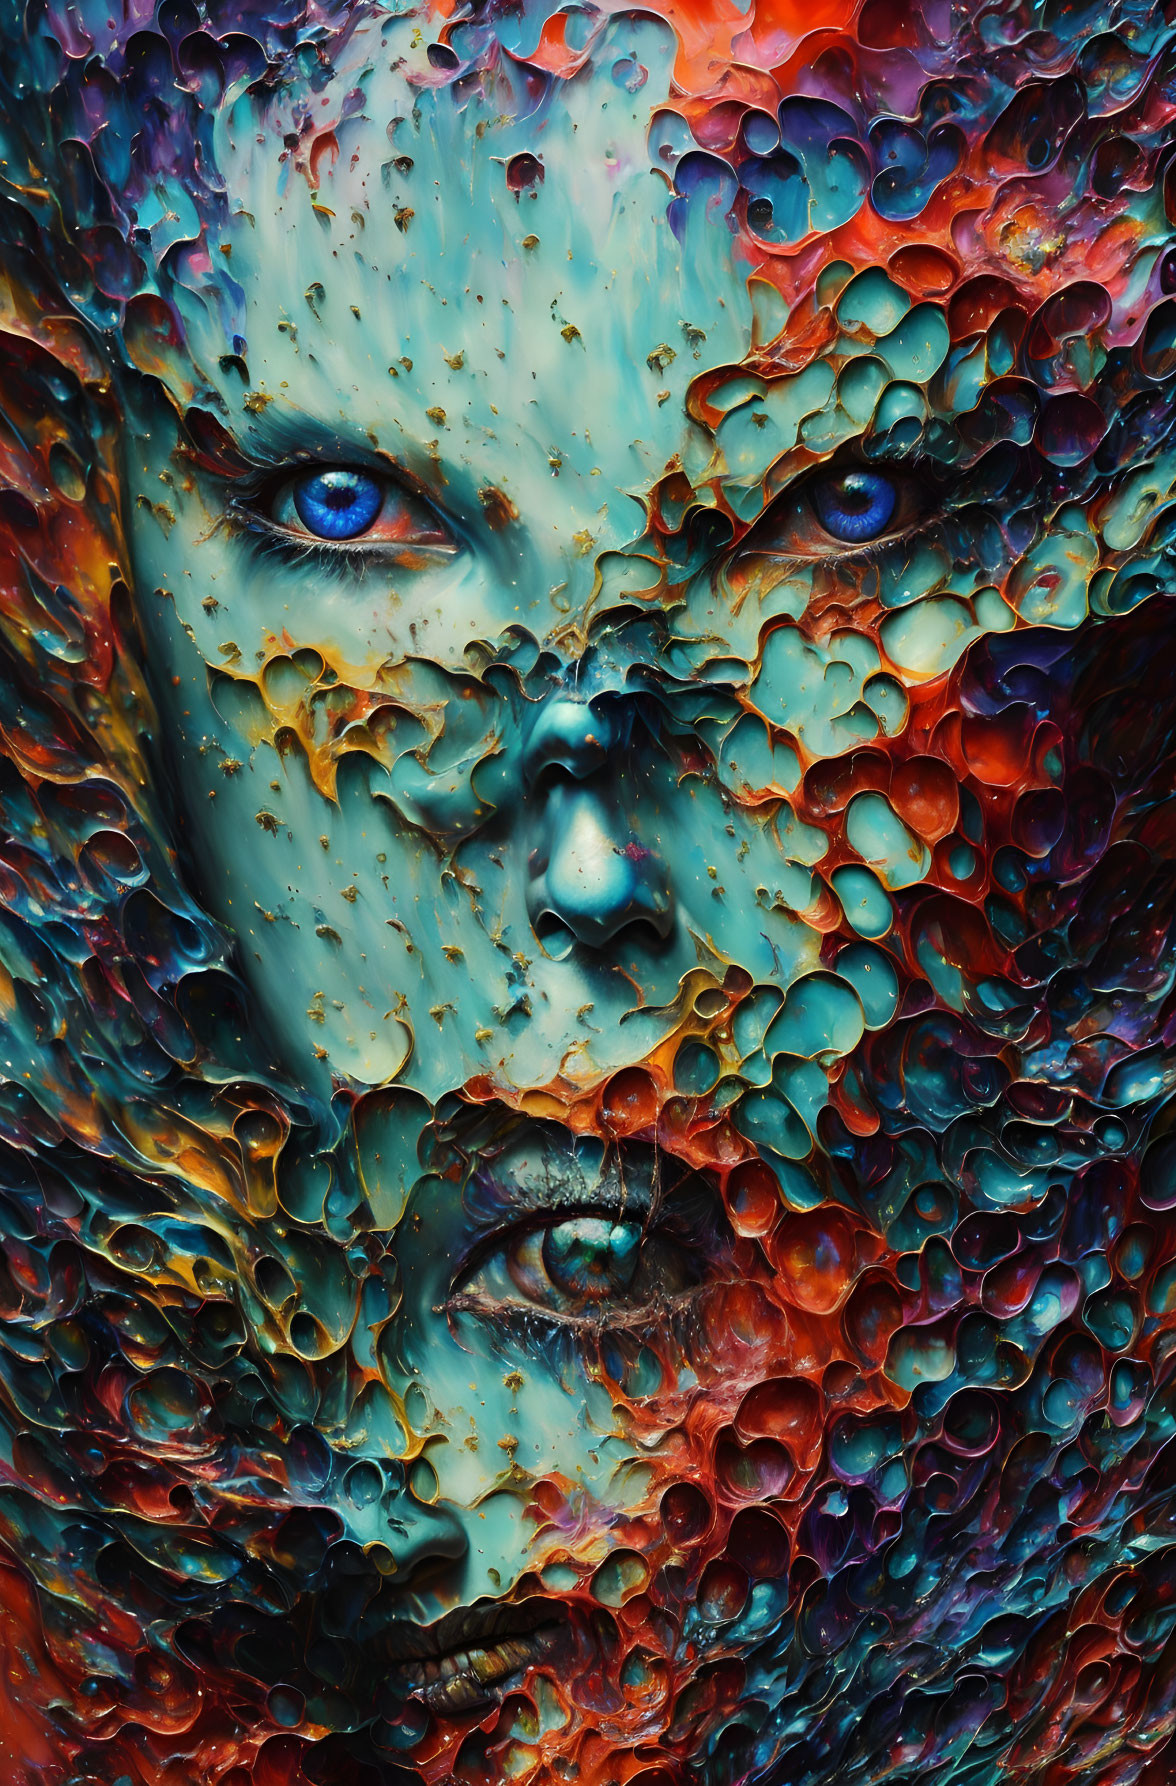 Colorful portrait with intense blue eyes and textured patterns.